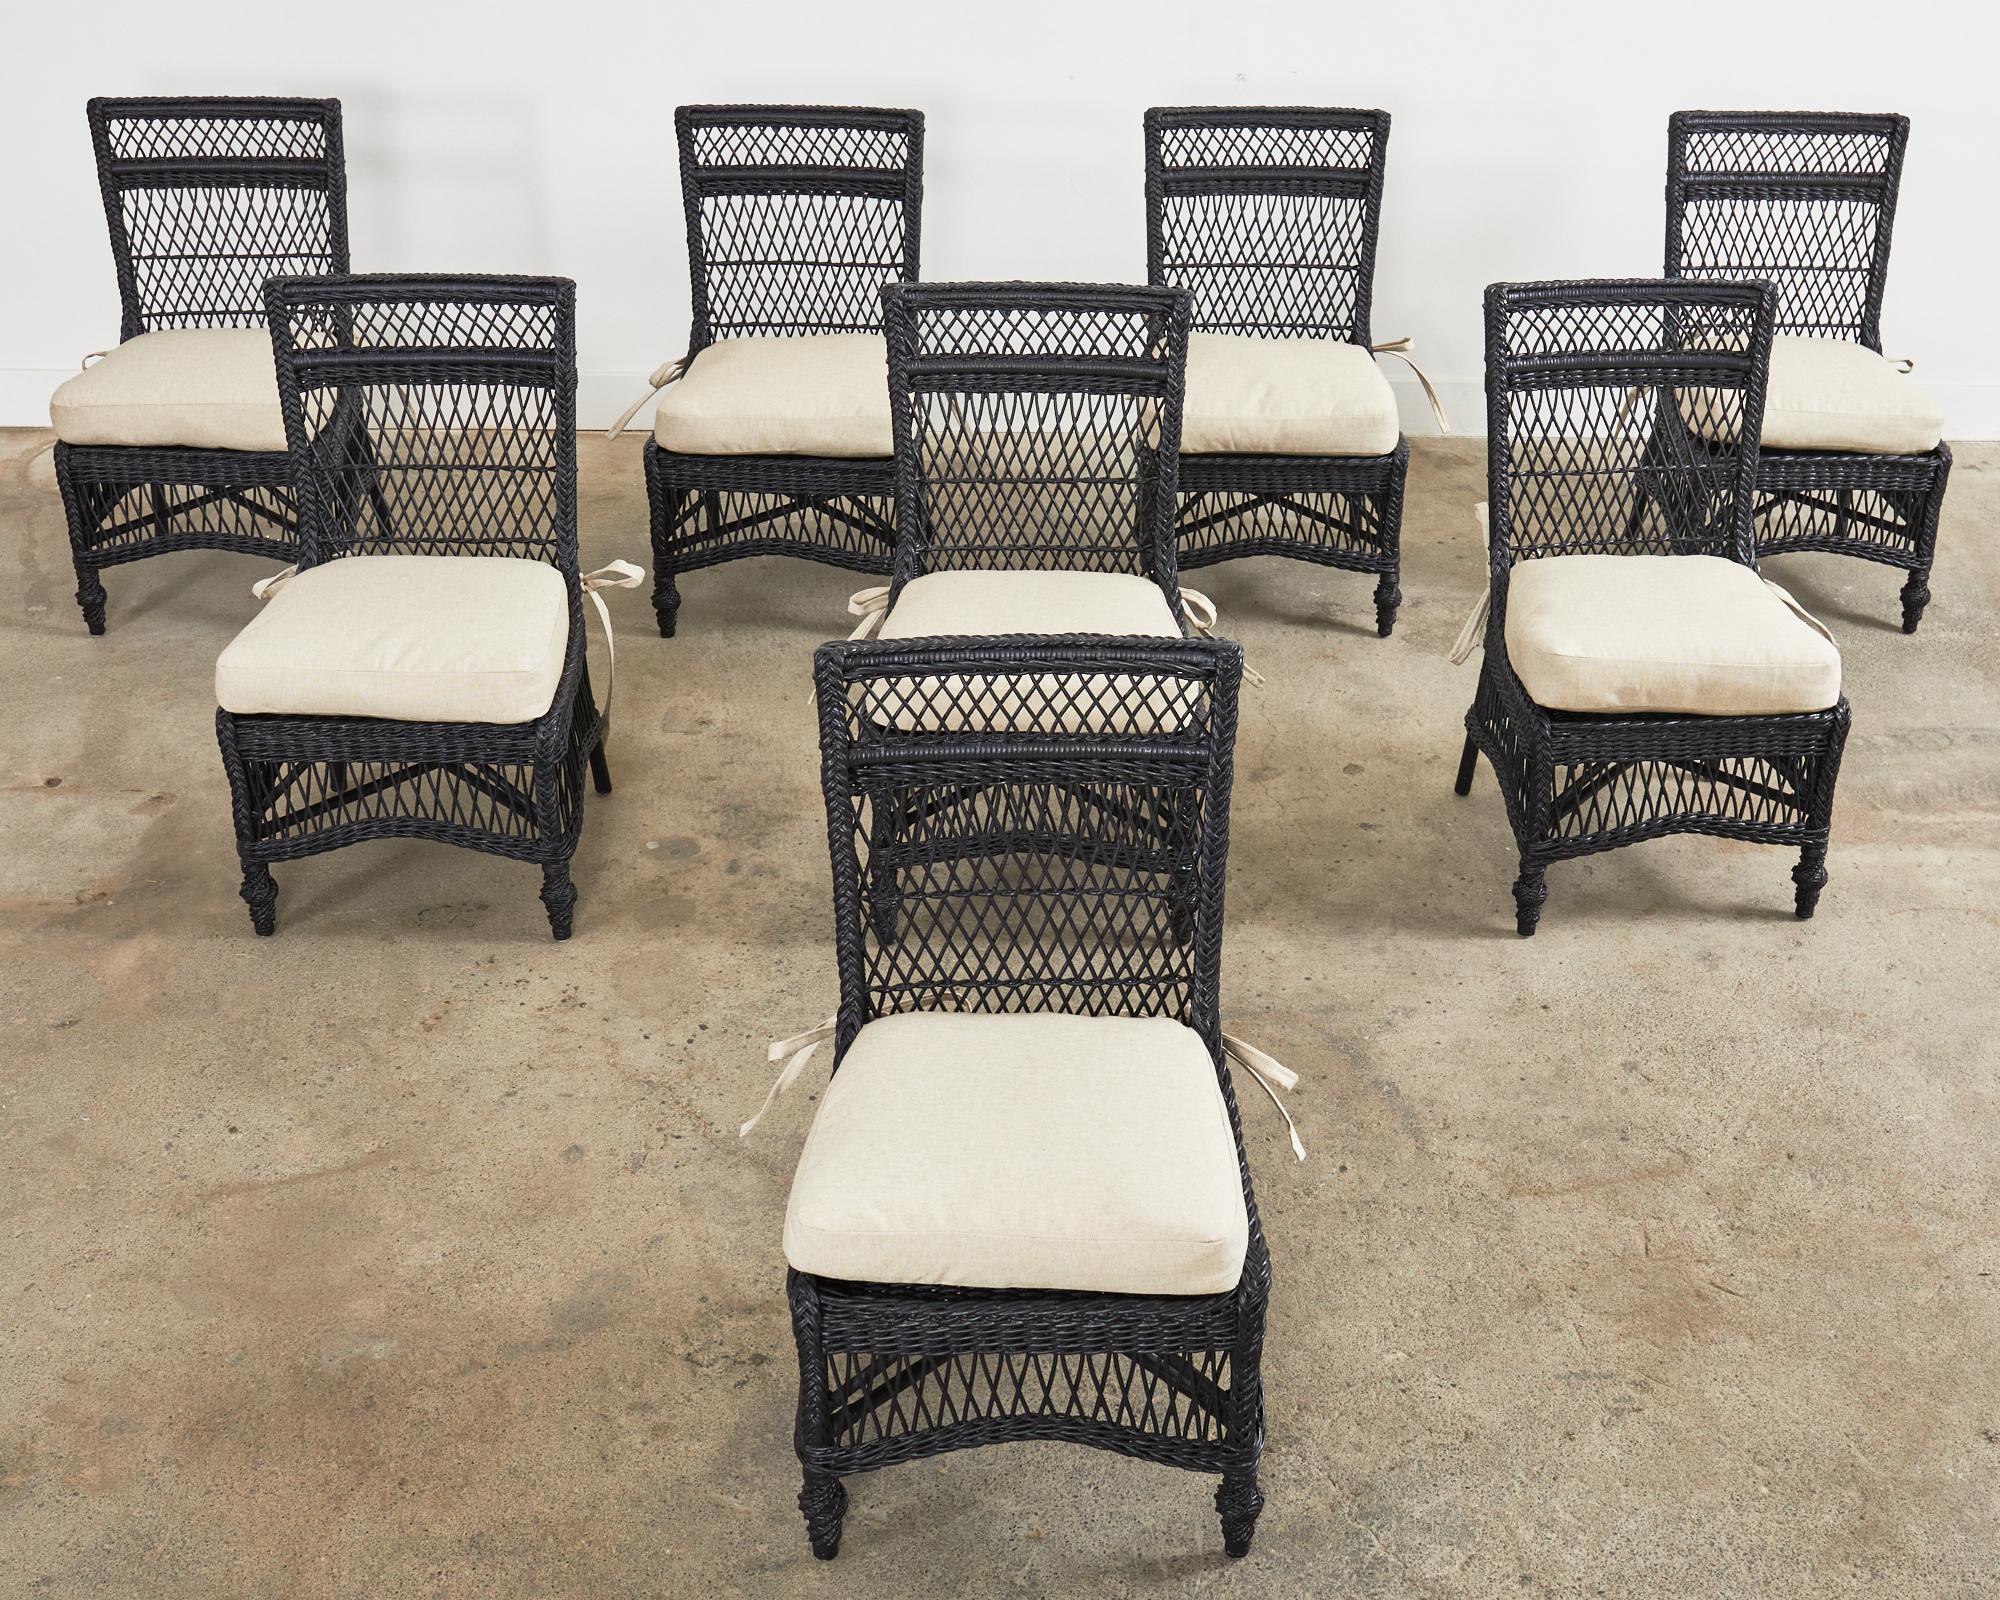 Painted Set of Eight Bar Harbor Style Rattan Wicker Dining Chairs 